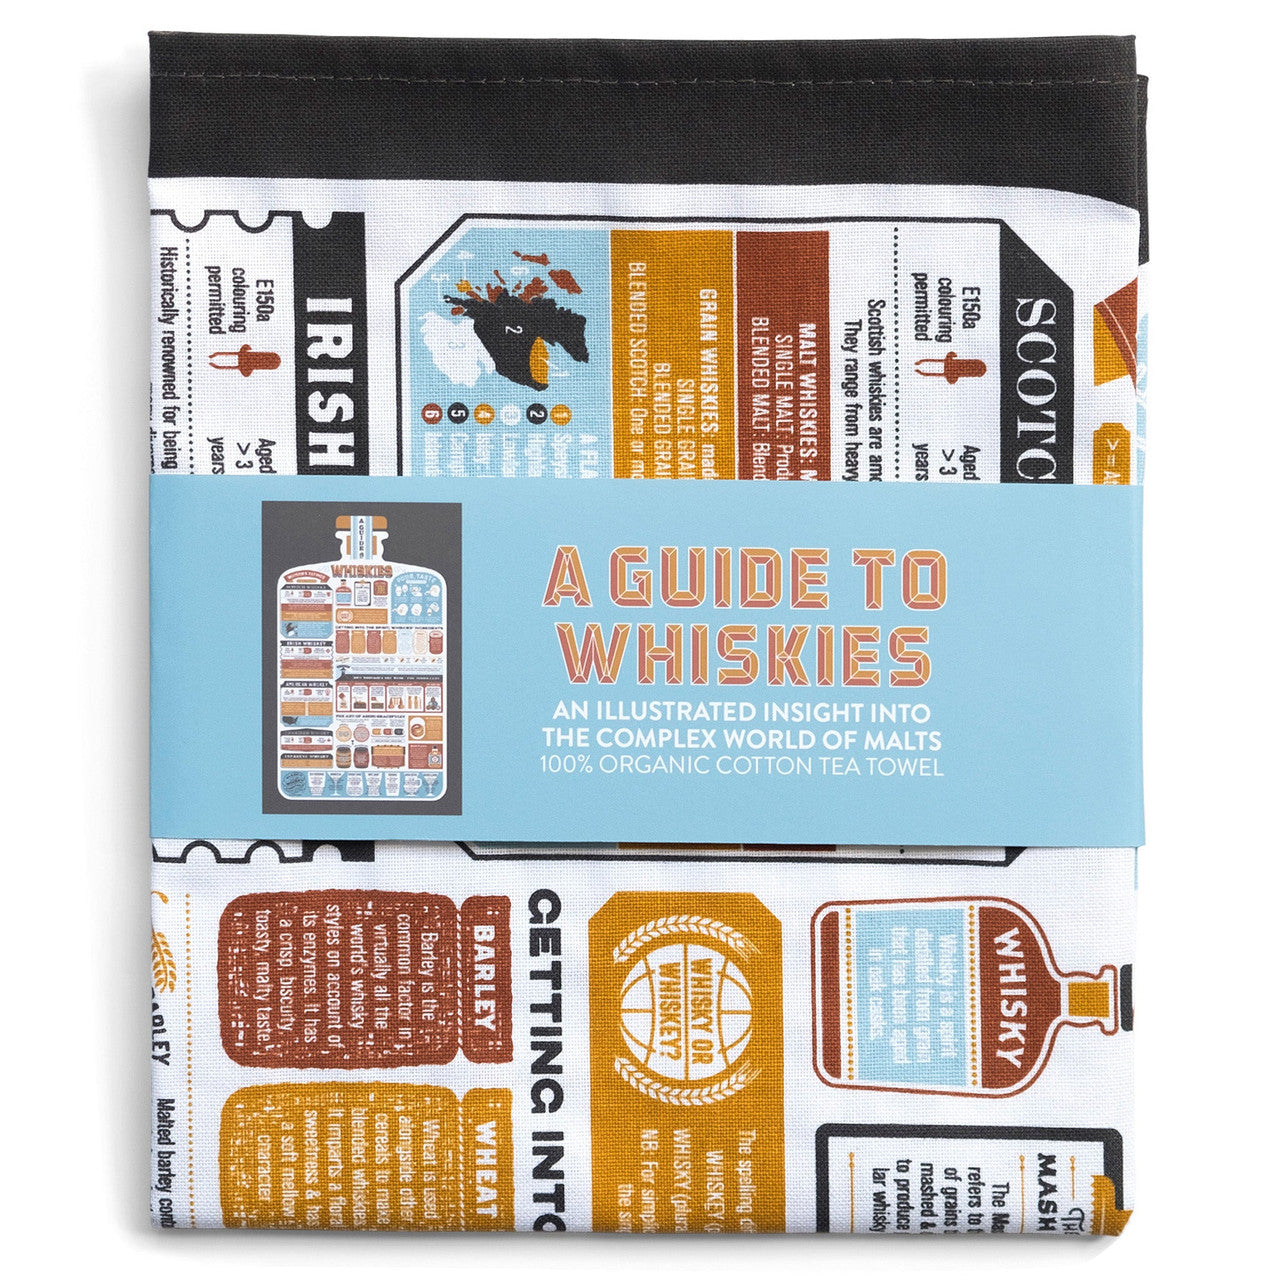 A Guide to Whiskies Tea Towel by Stuart Gardiner.